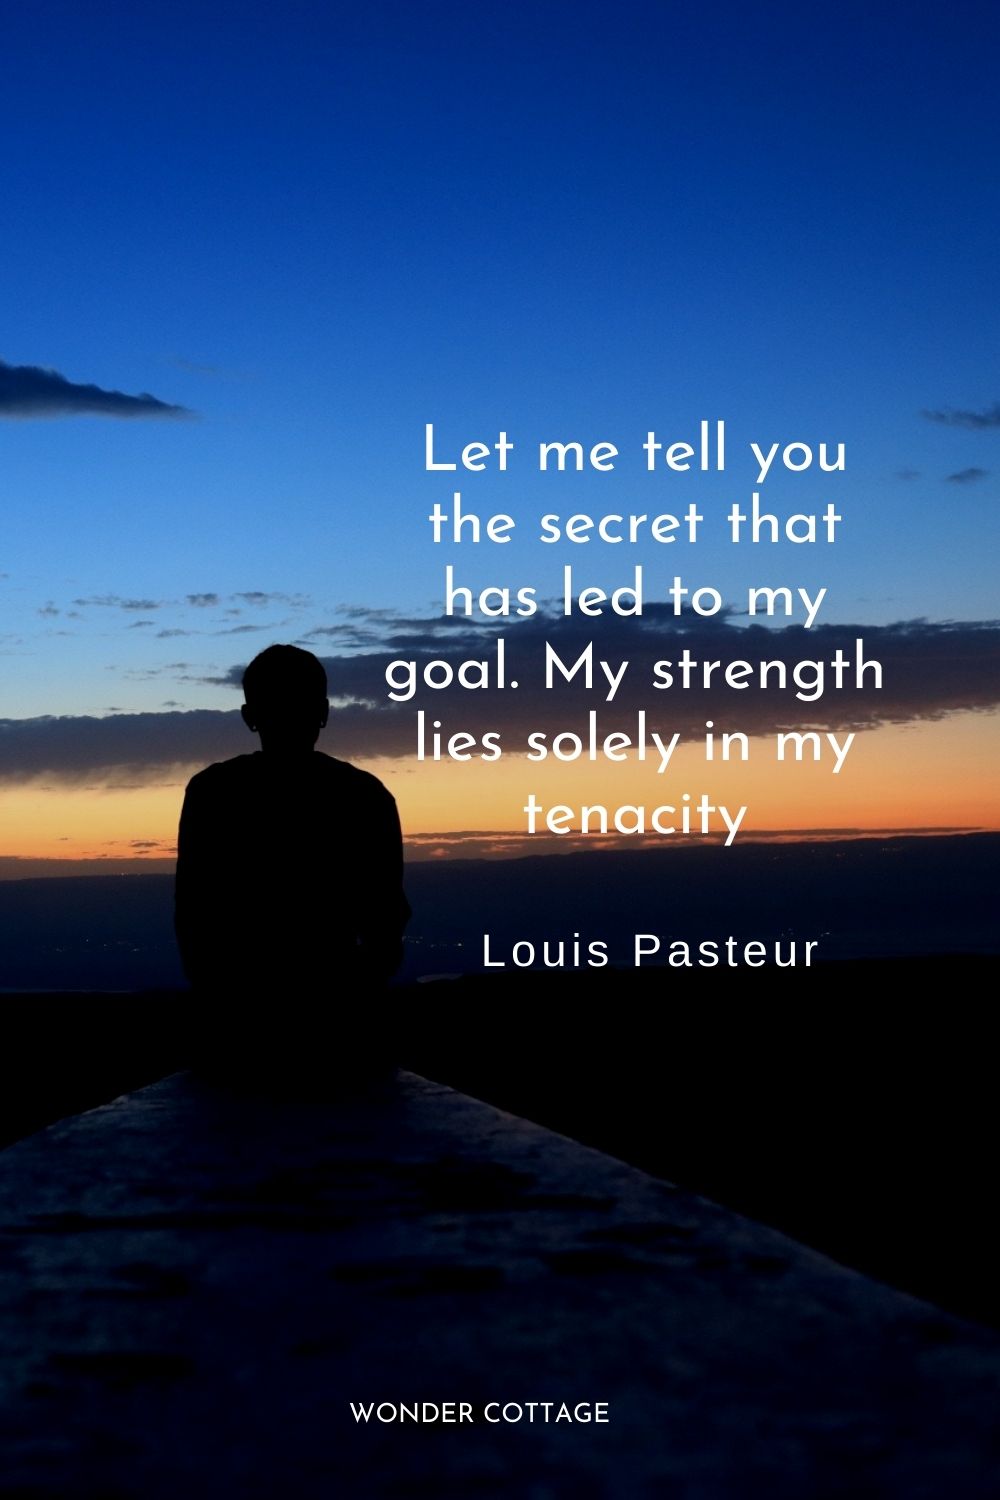 Let me tell you the secret that has led to my goal. My strength lies solely in my tenacity.  Louis Pasteur